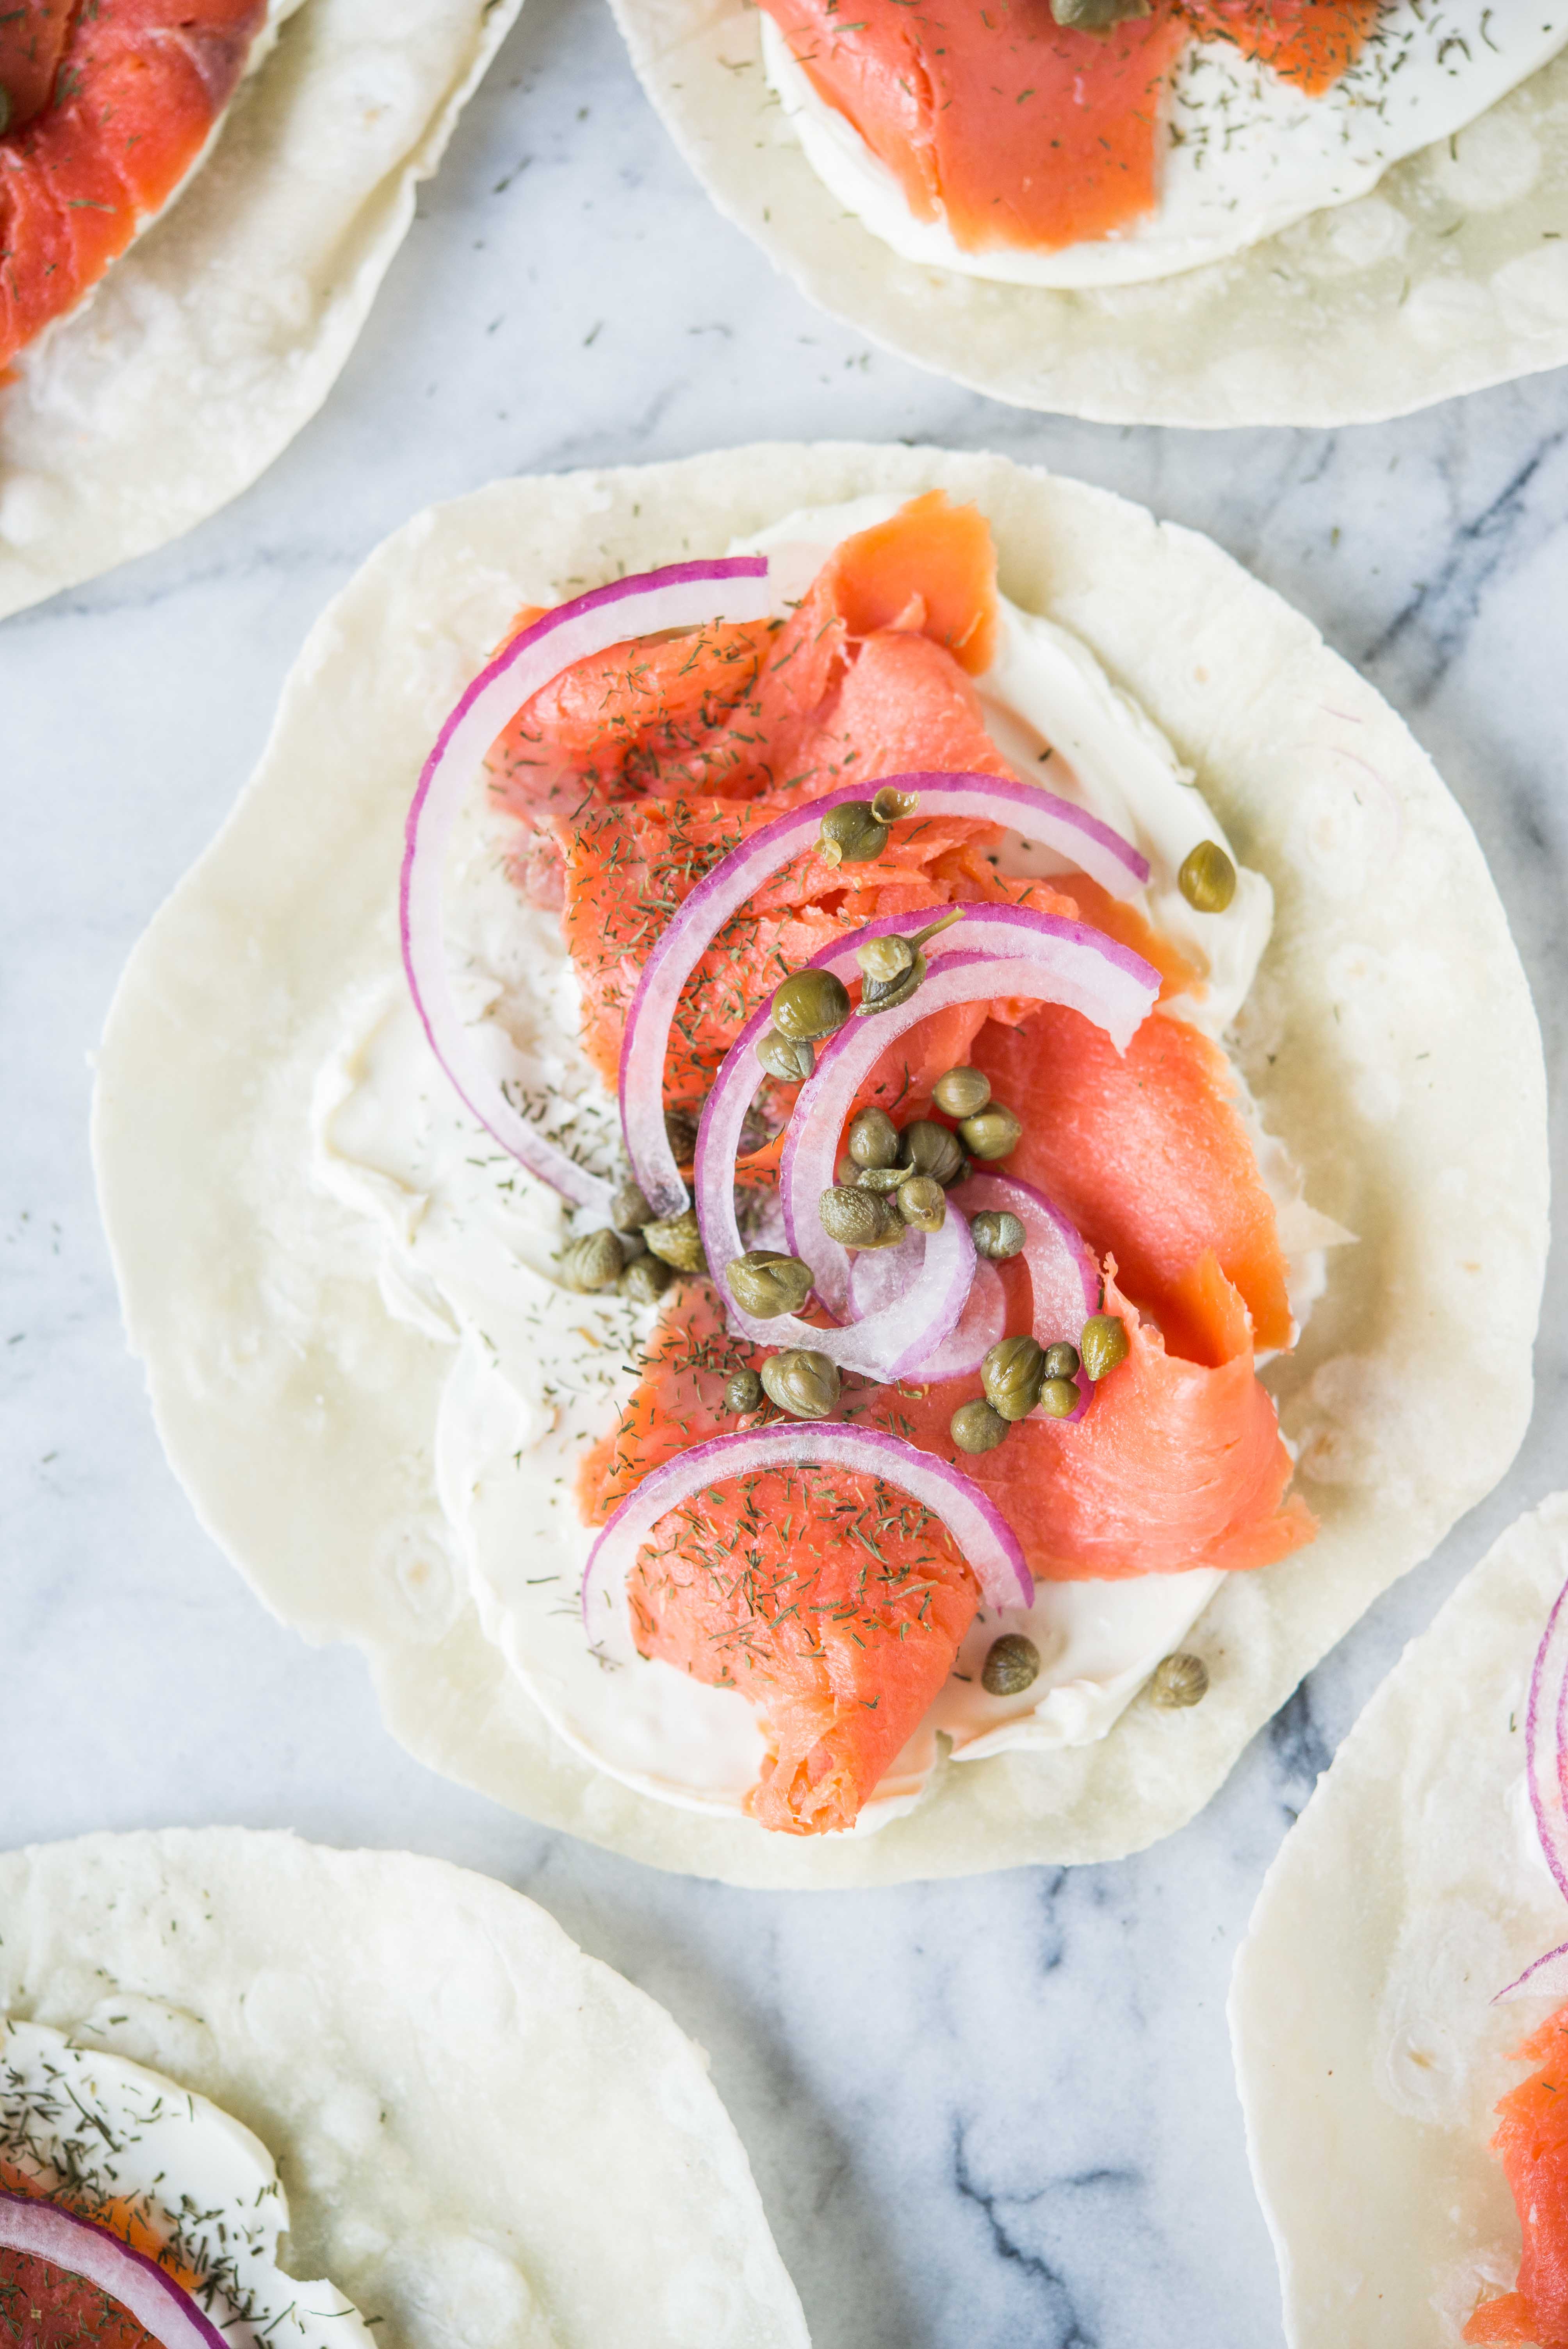 smoked salmon lunch wrap - tortilla smeared with cream cheese, smoked salmon, capers, and red onion, on a marble board